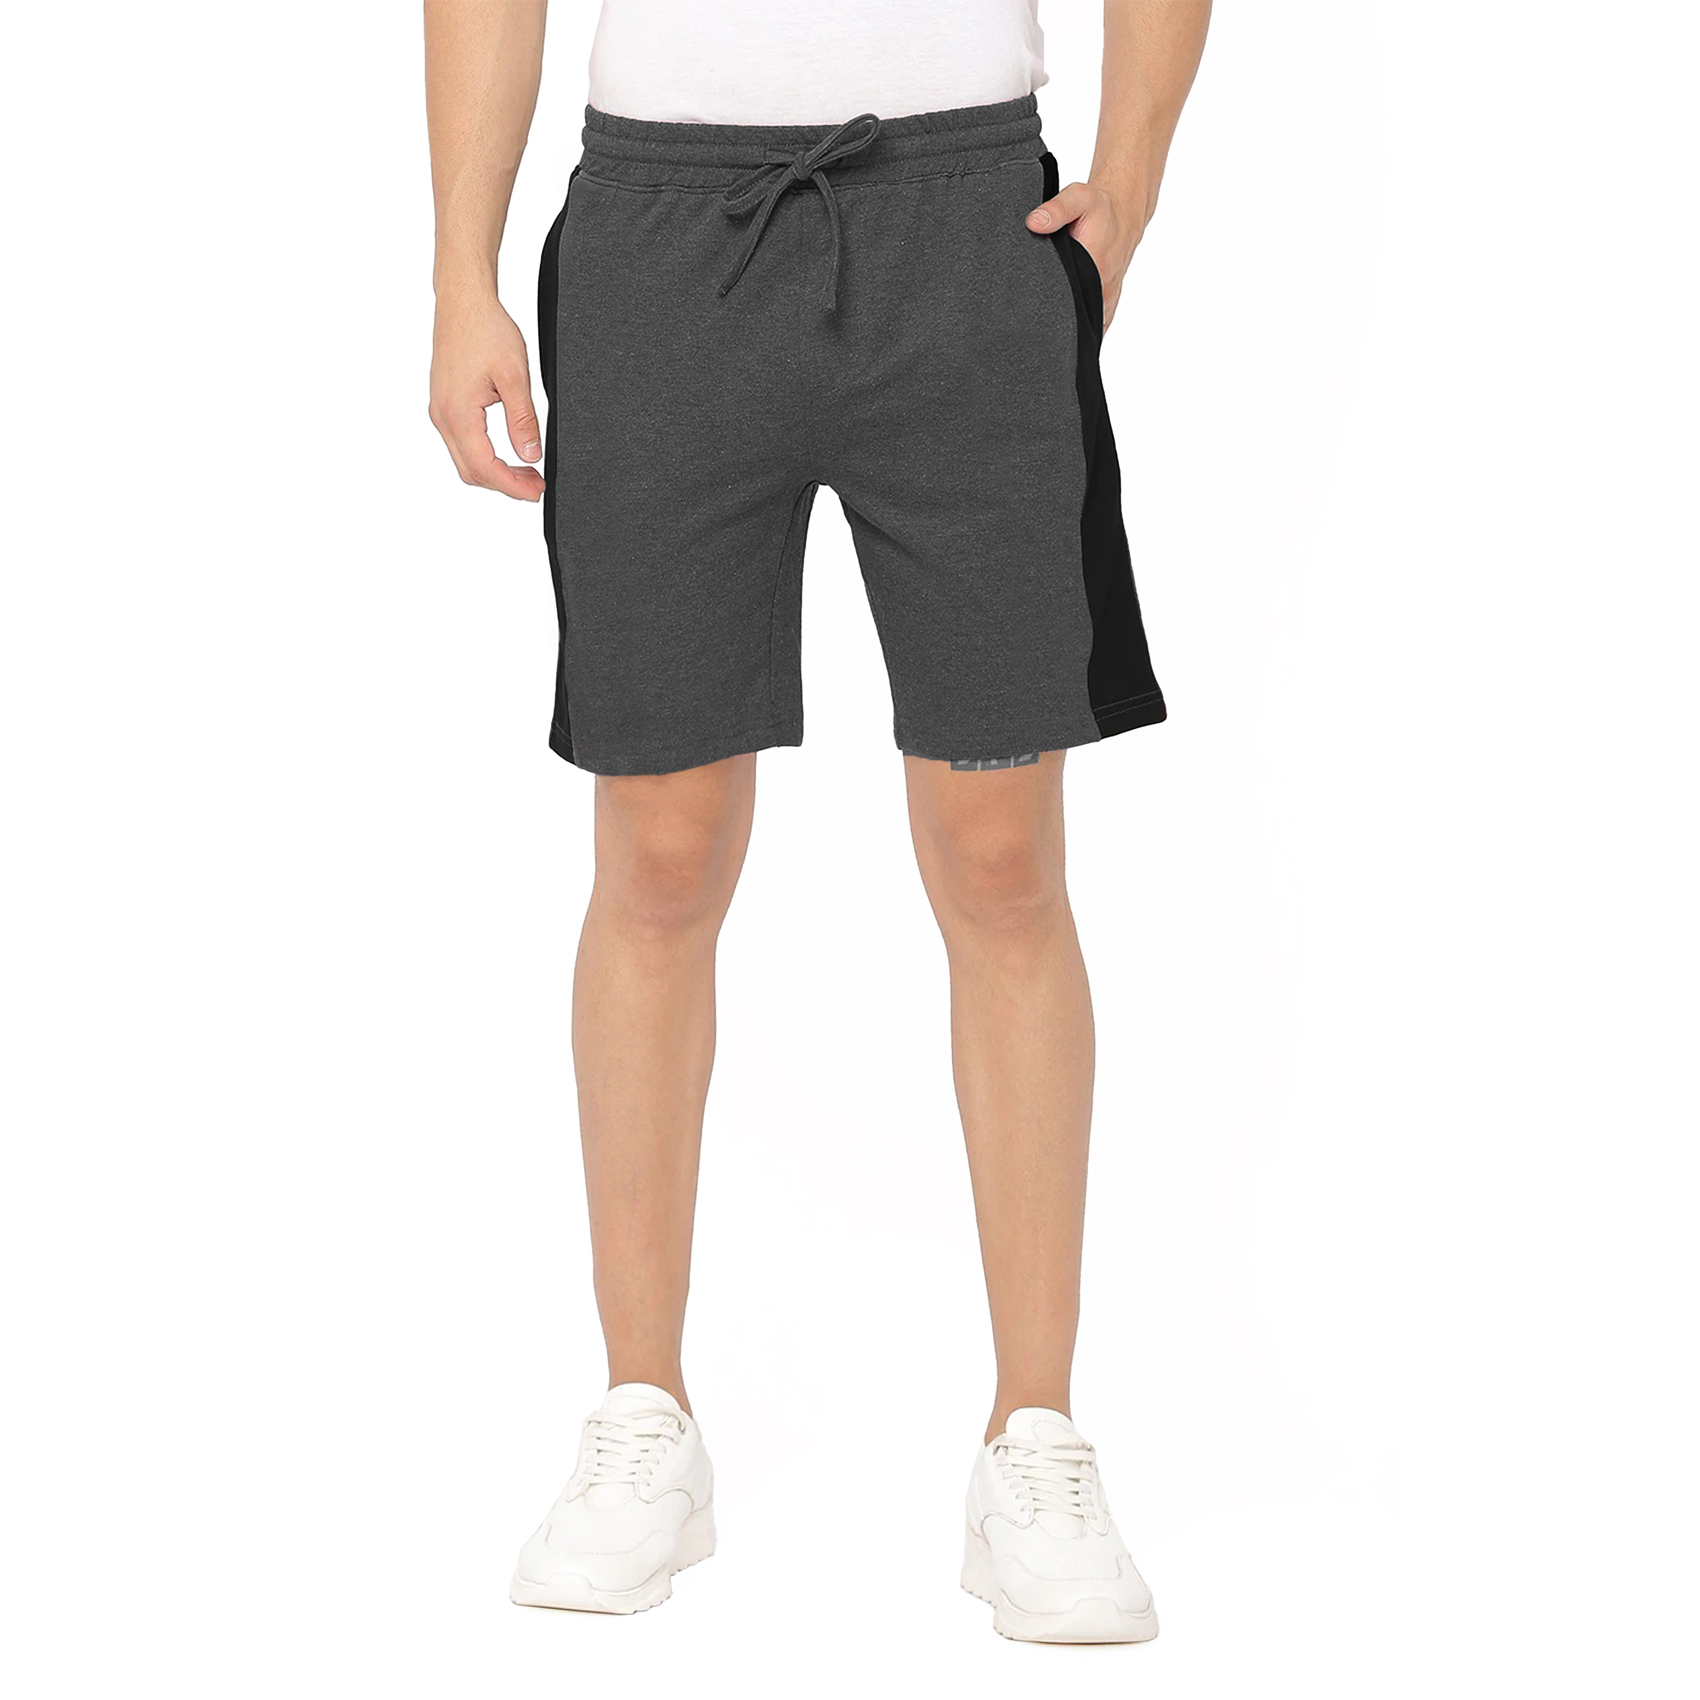 SHORT HOMBRE - SWISS LORD - SUN 三 CHARCOTTE/NEGRO